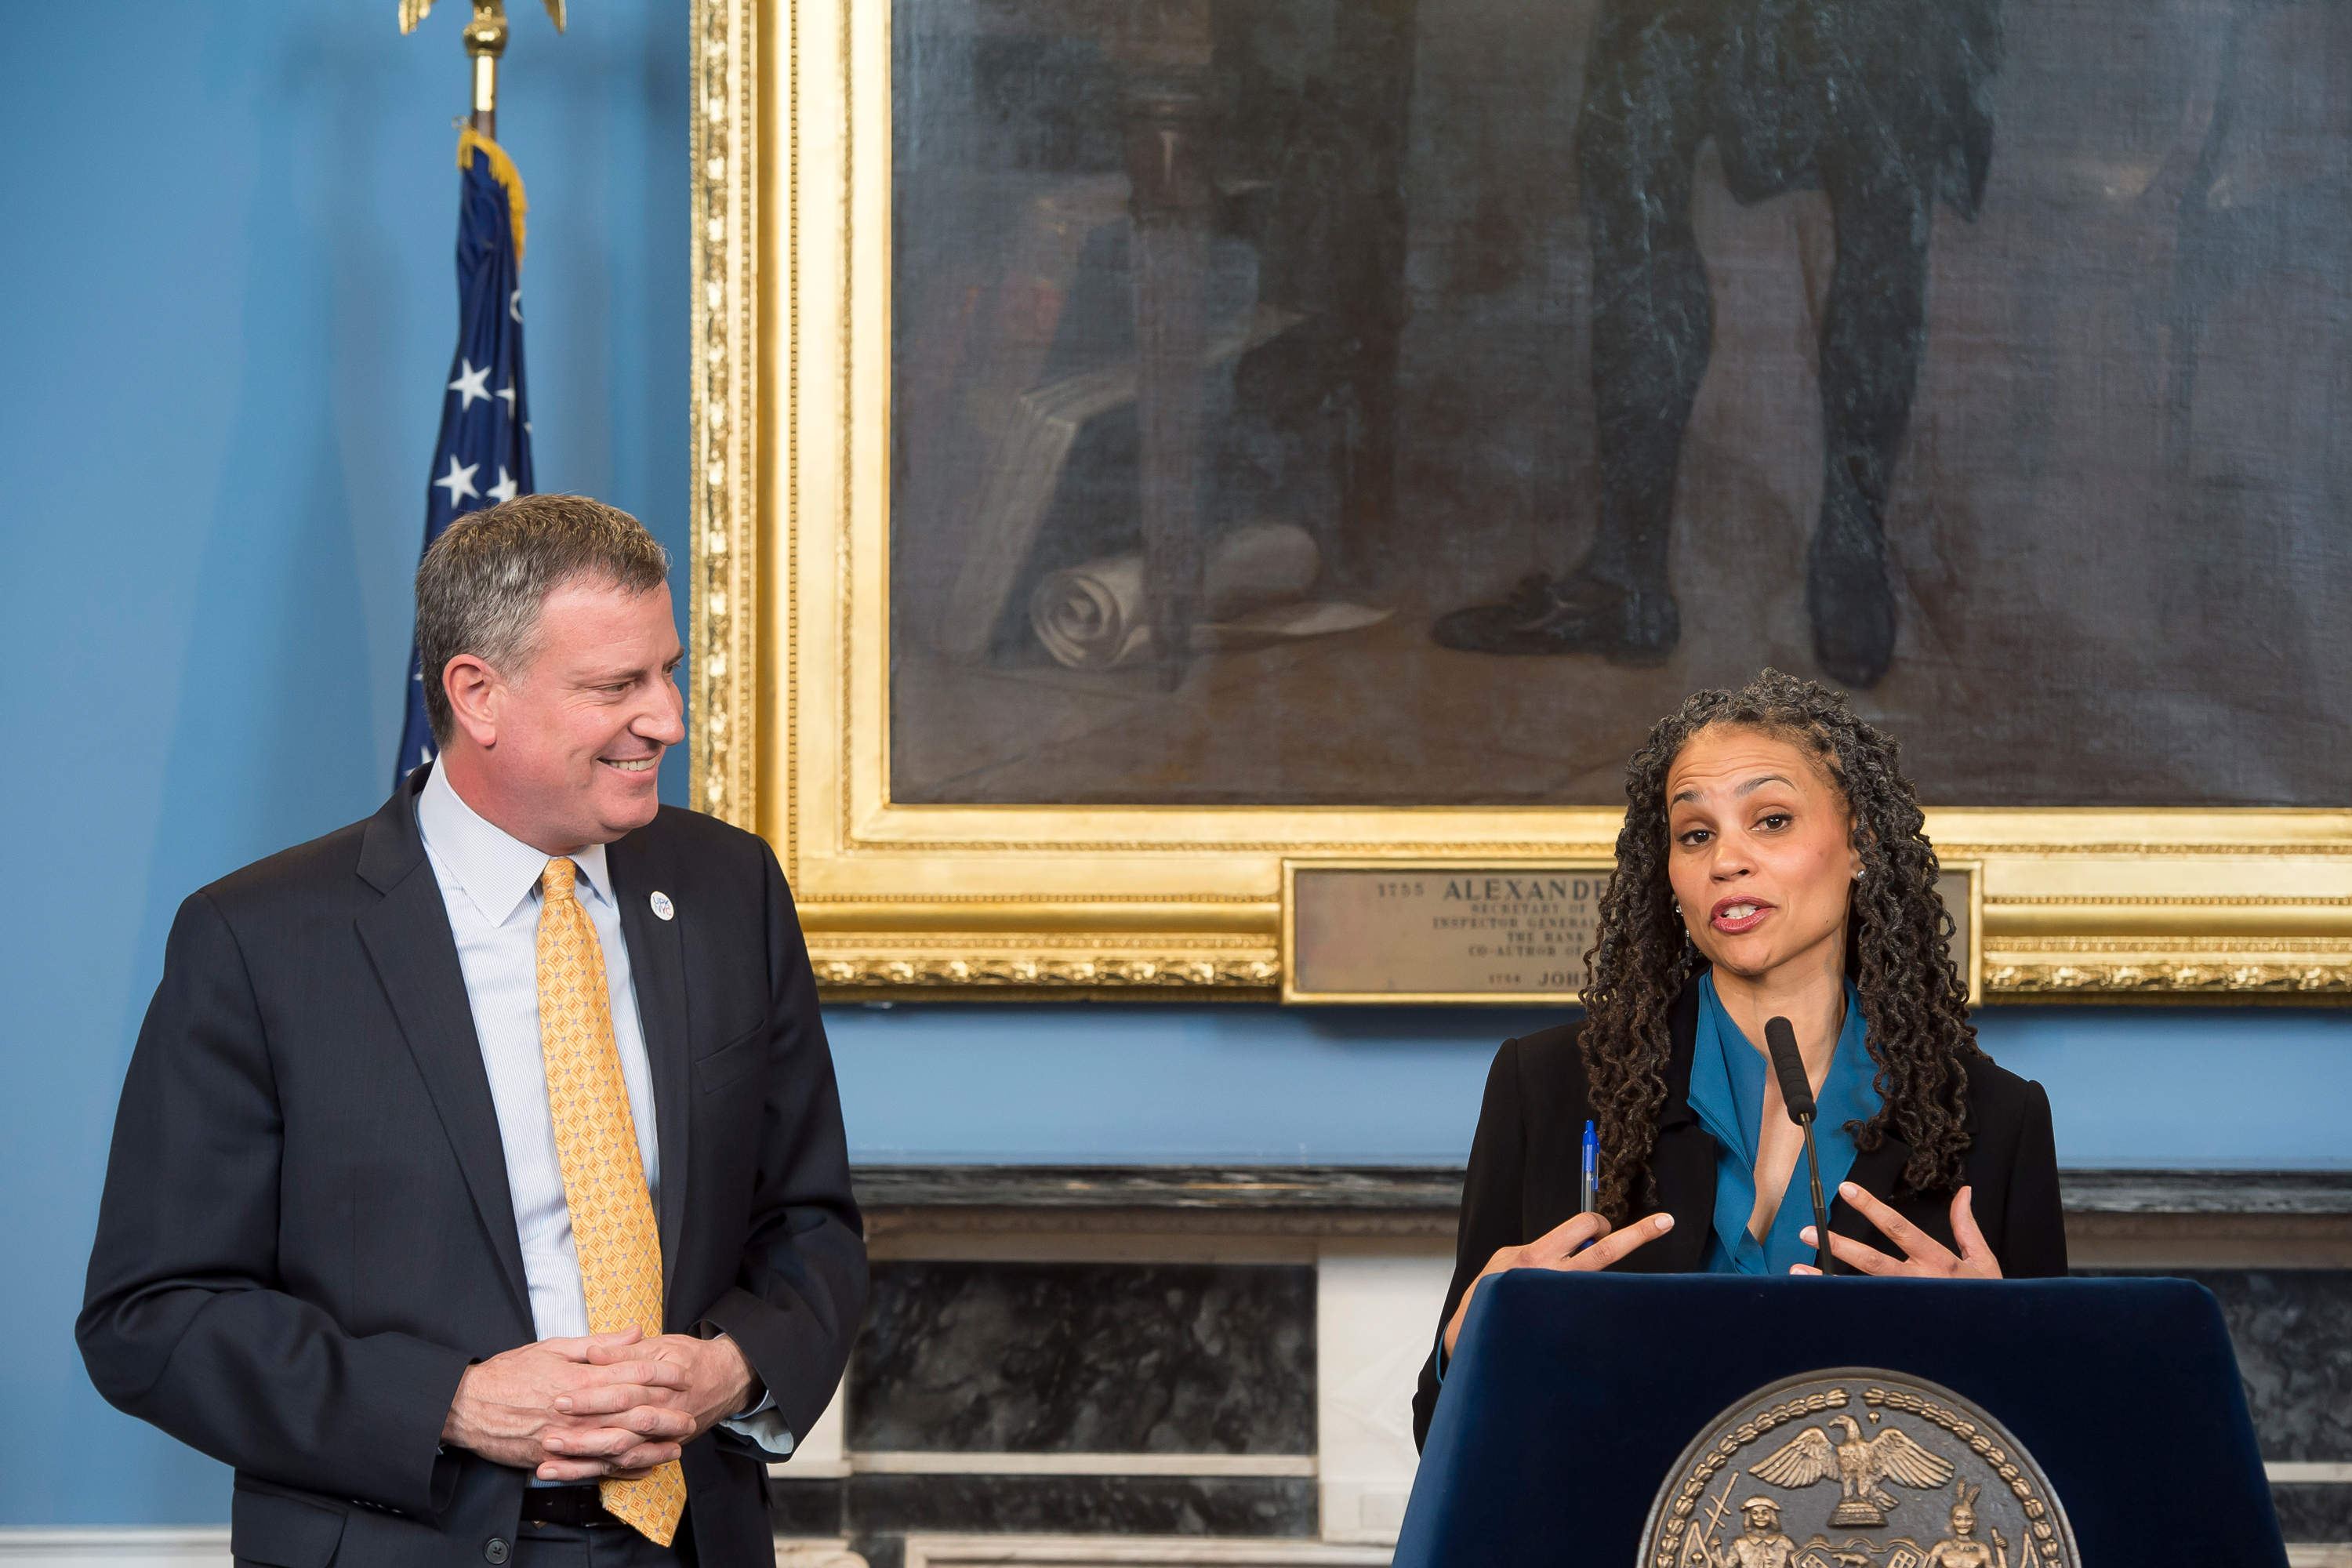 Mayor Bill de Blasio announces Maya Wiley’s appointment as counselor to the mayor in City Hall’s Blue Room, on February 18, 2014.